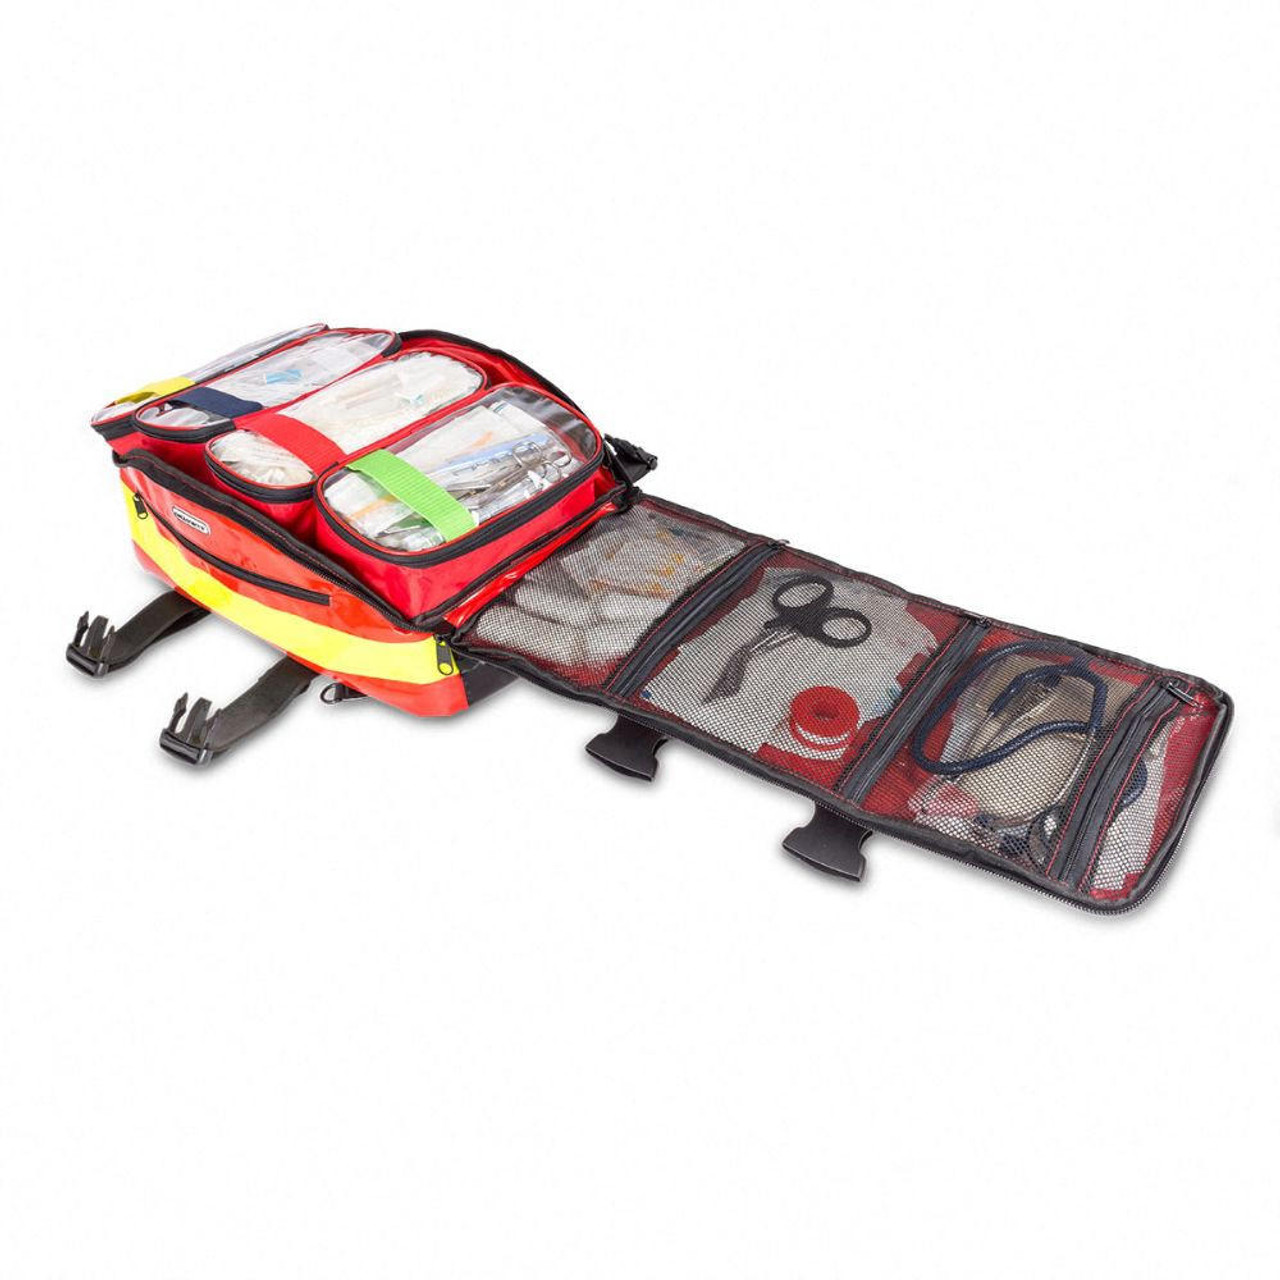  Emergency Medical Backpack Red 30 Litre with 4 Internal Pouches 